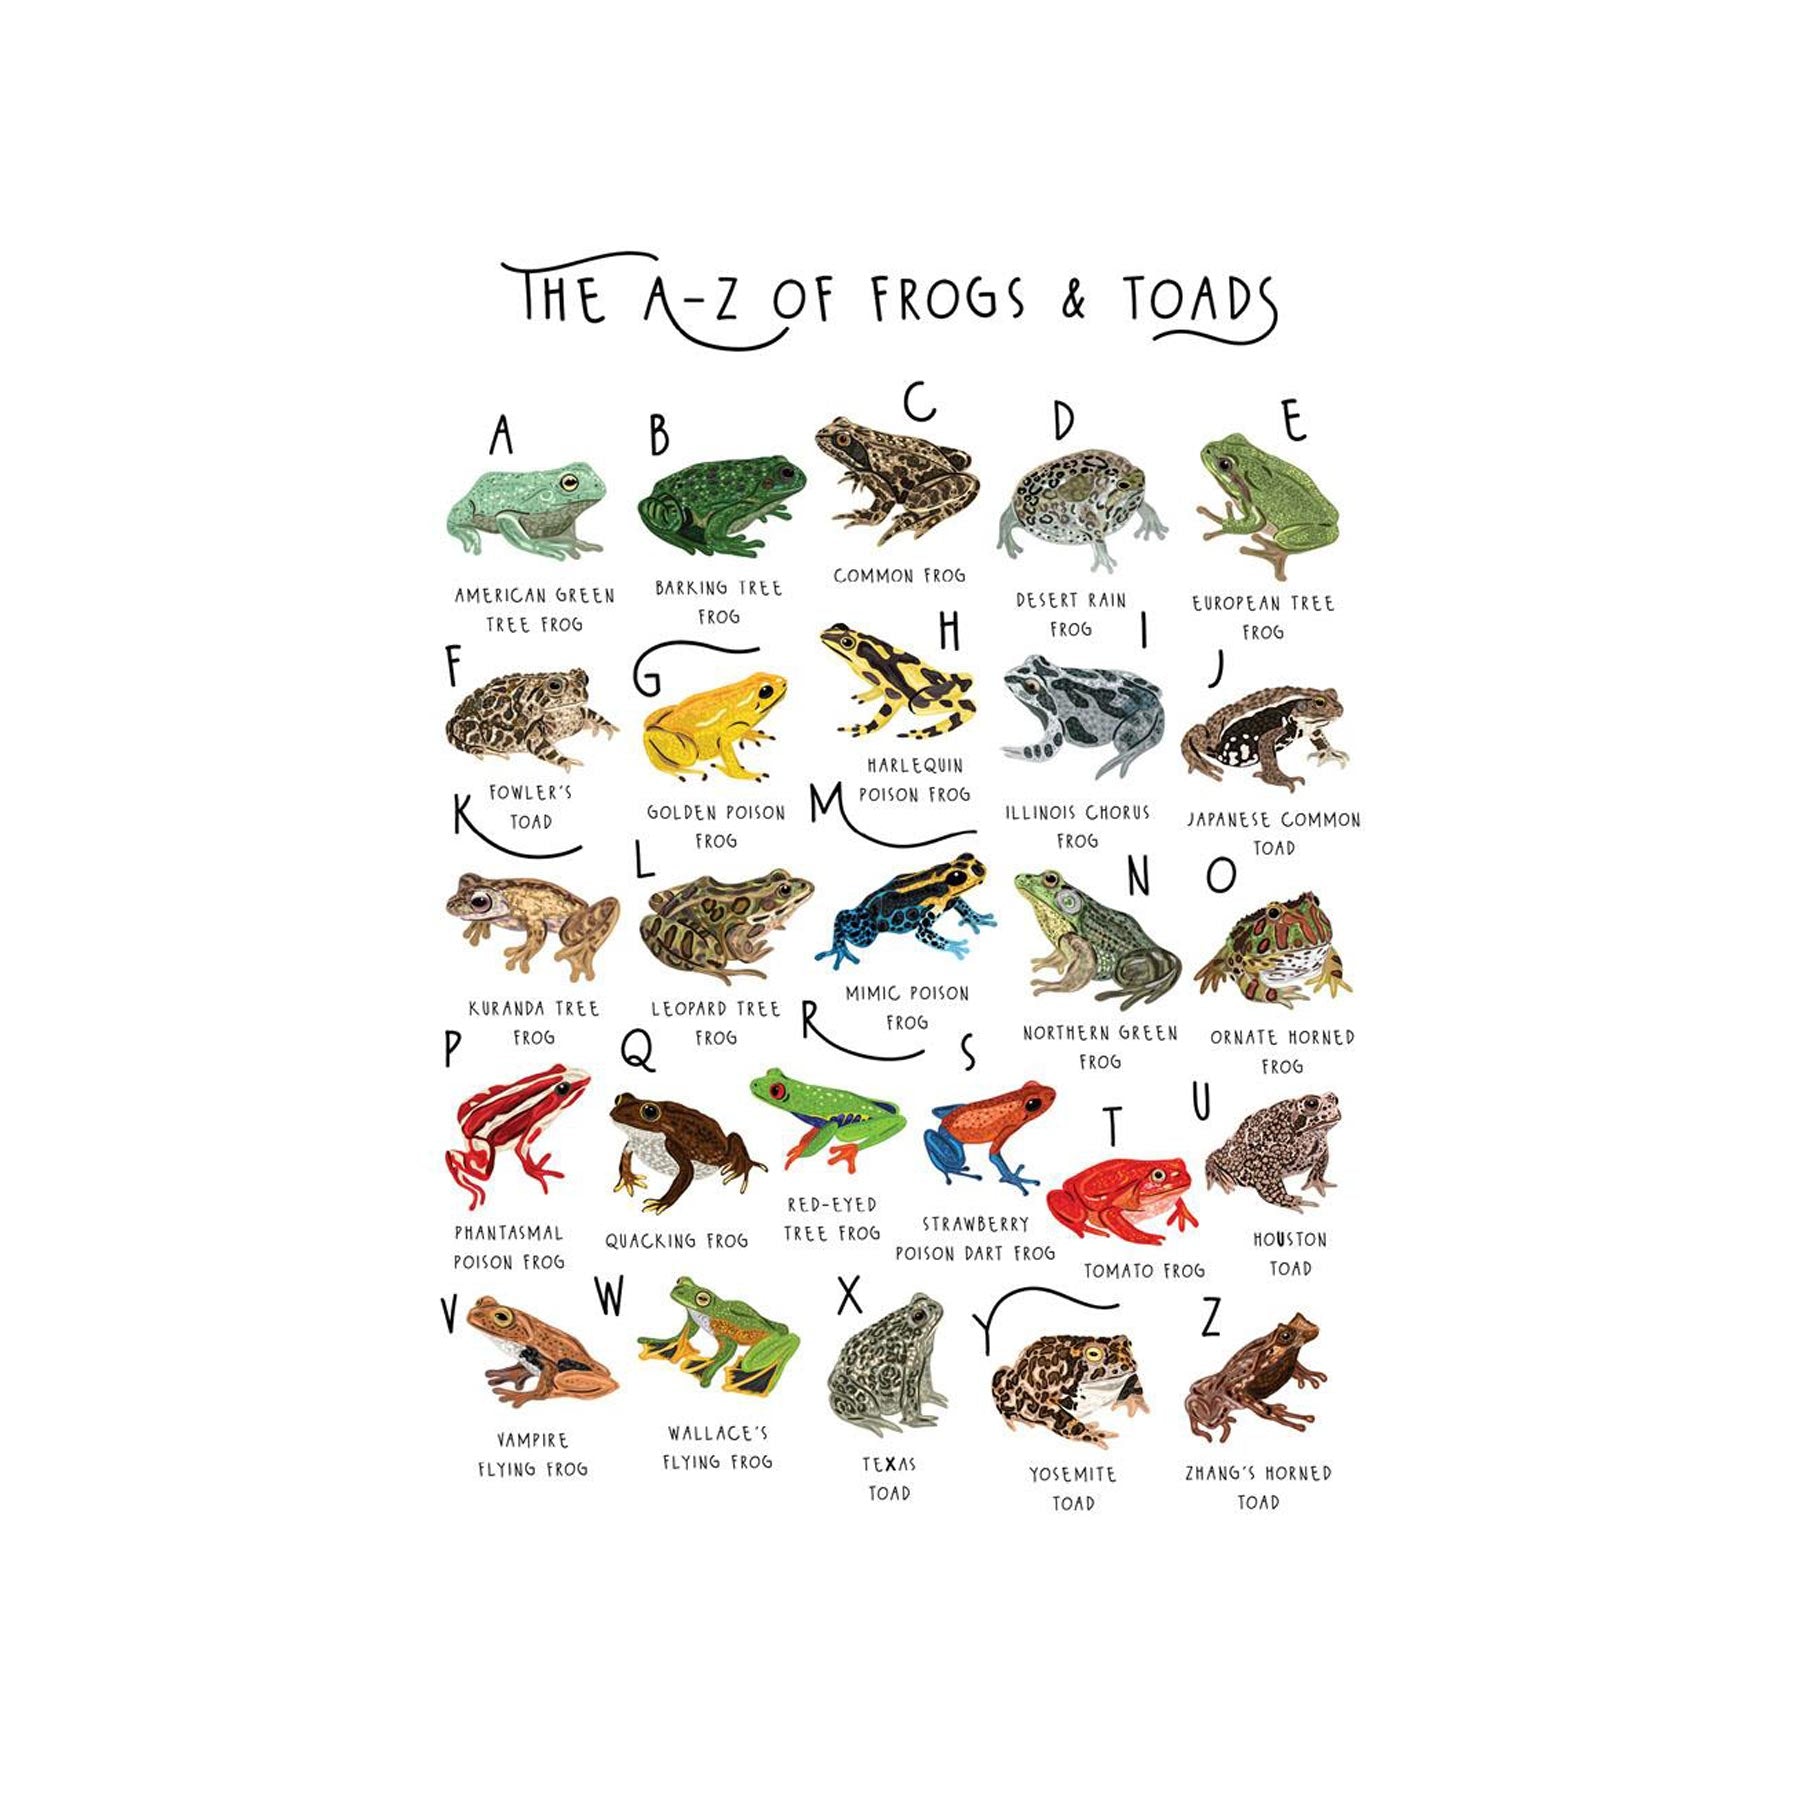 The A-Z of frogs and toads greetings card